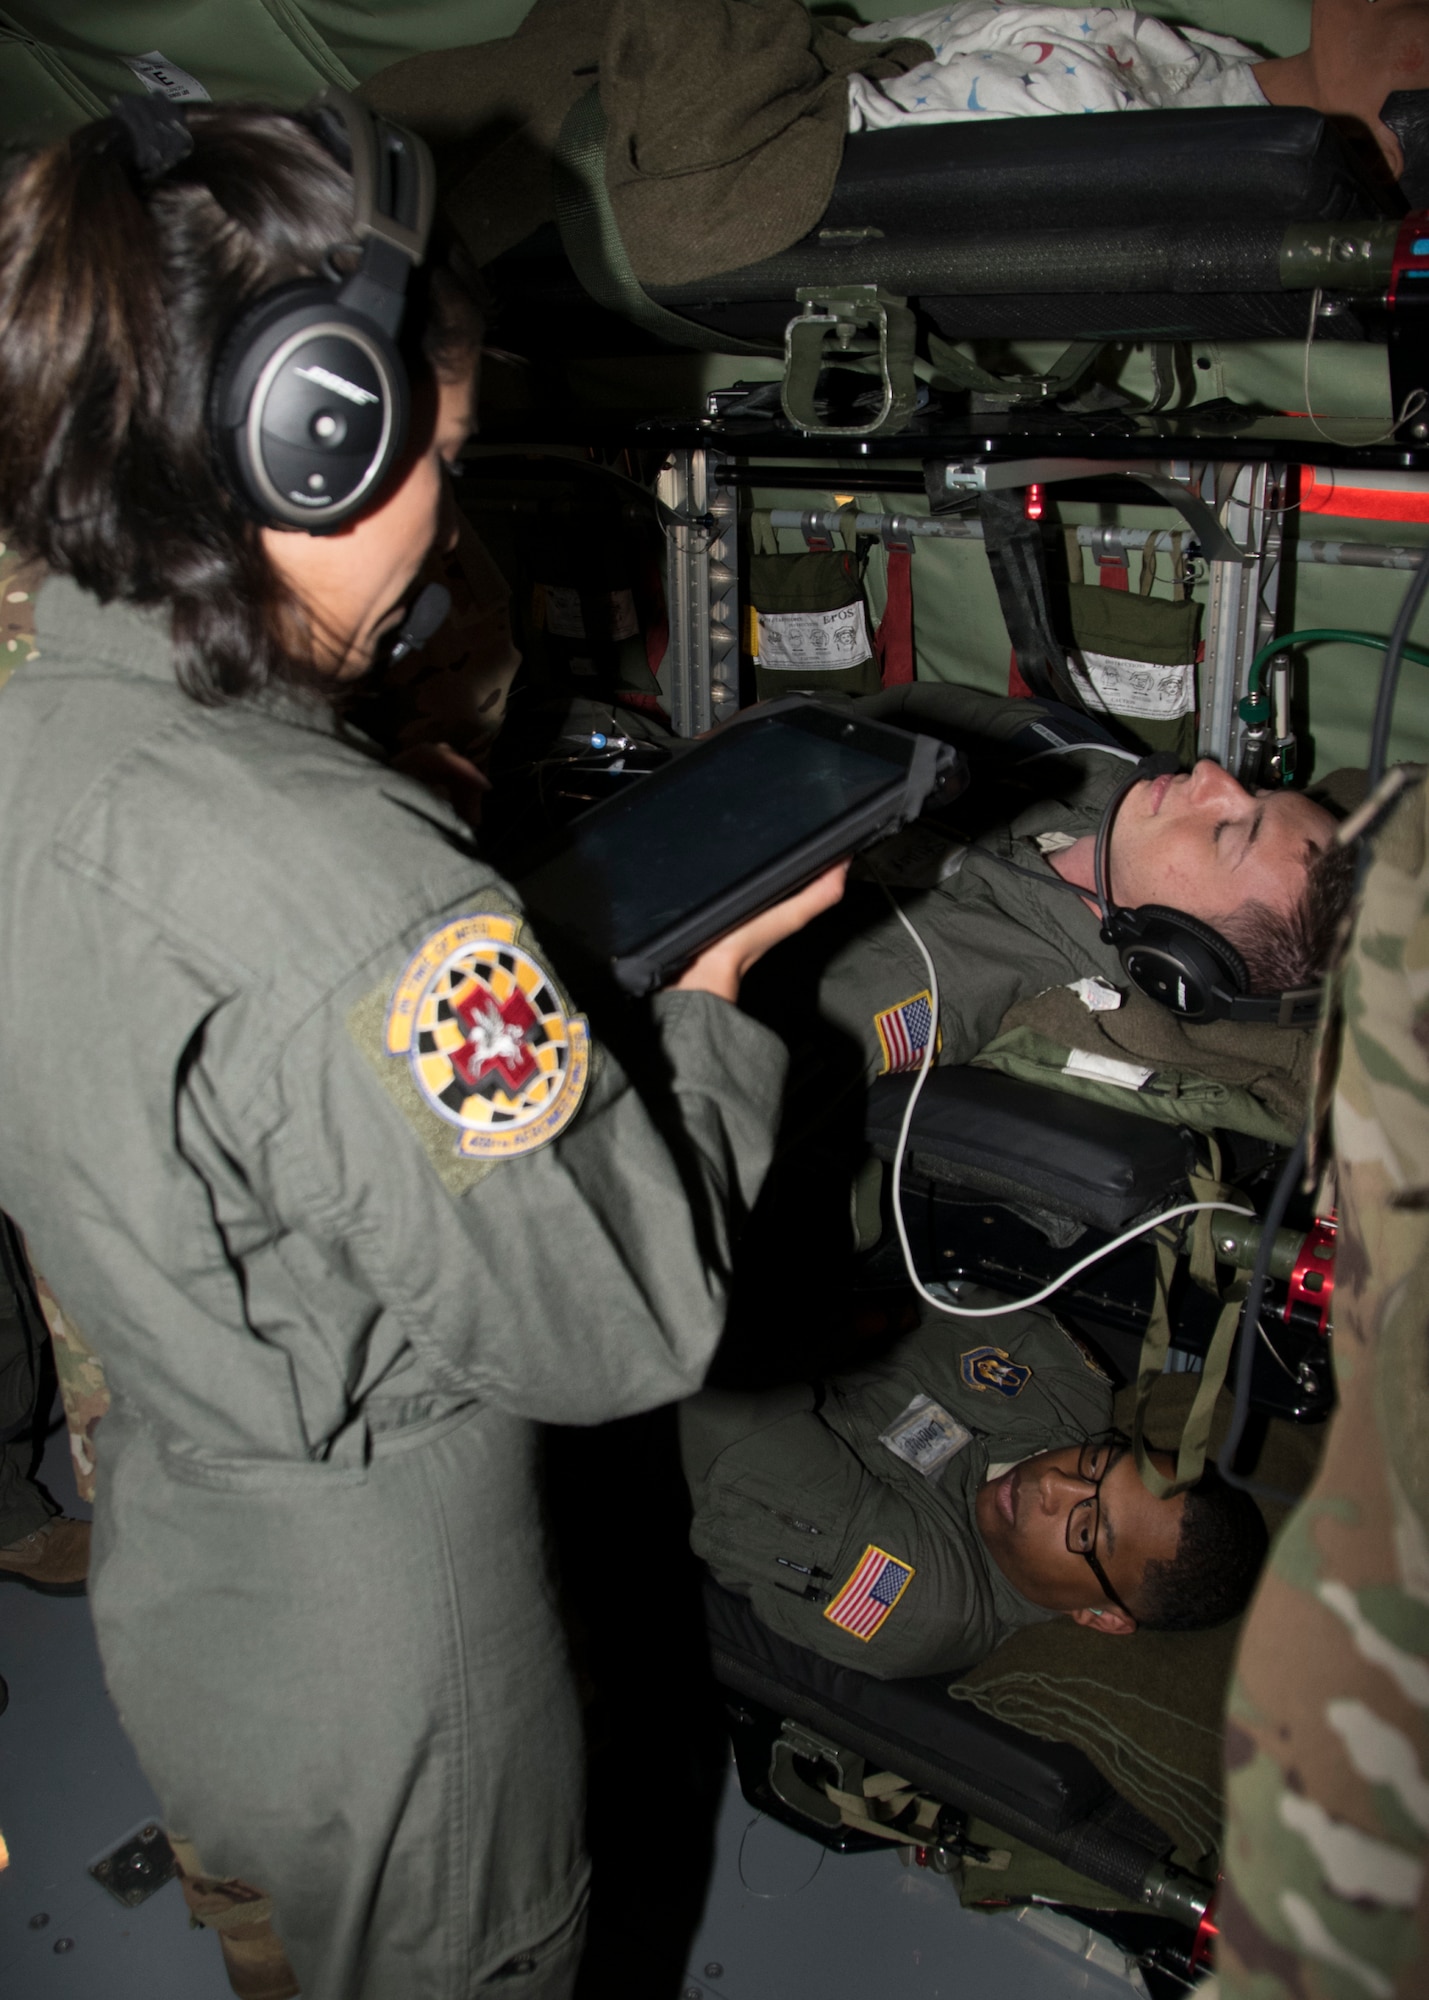 Senior Airman Maria Moposita, 459th Aeromedical Evacuation Squadron flight medic, checks on her patient mid-flight as part of an off station trainer Sept. 20, 2019. The AES team conducted training on a KC-135 Stratotanker during a flight to Wright Patterson, Ohio, where they later participated in the Air Force Marathon. (U.S. Air Force photo by Staff Sgt. Cierra Presentado/Released)